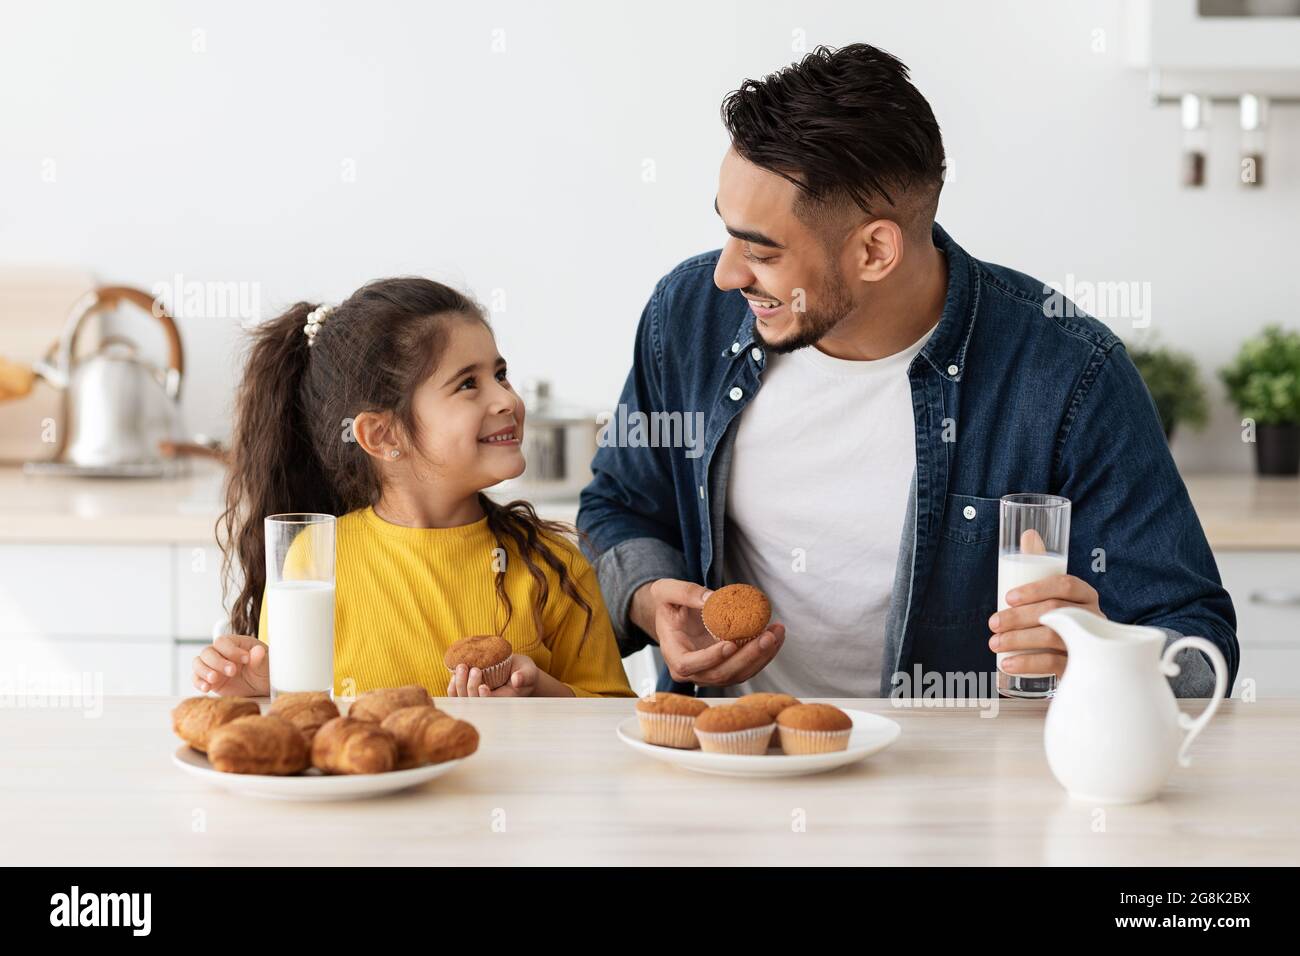 Little Arab Girl And Daddy Having A Bite In Kitchen At Home Stock Photo